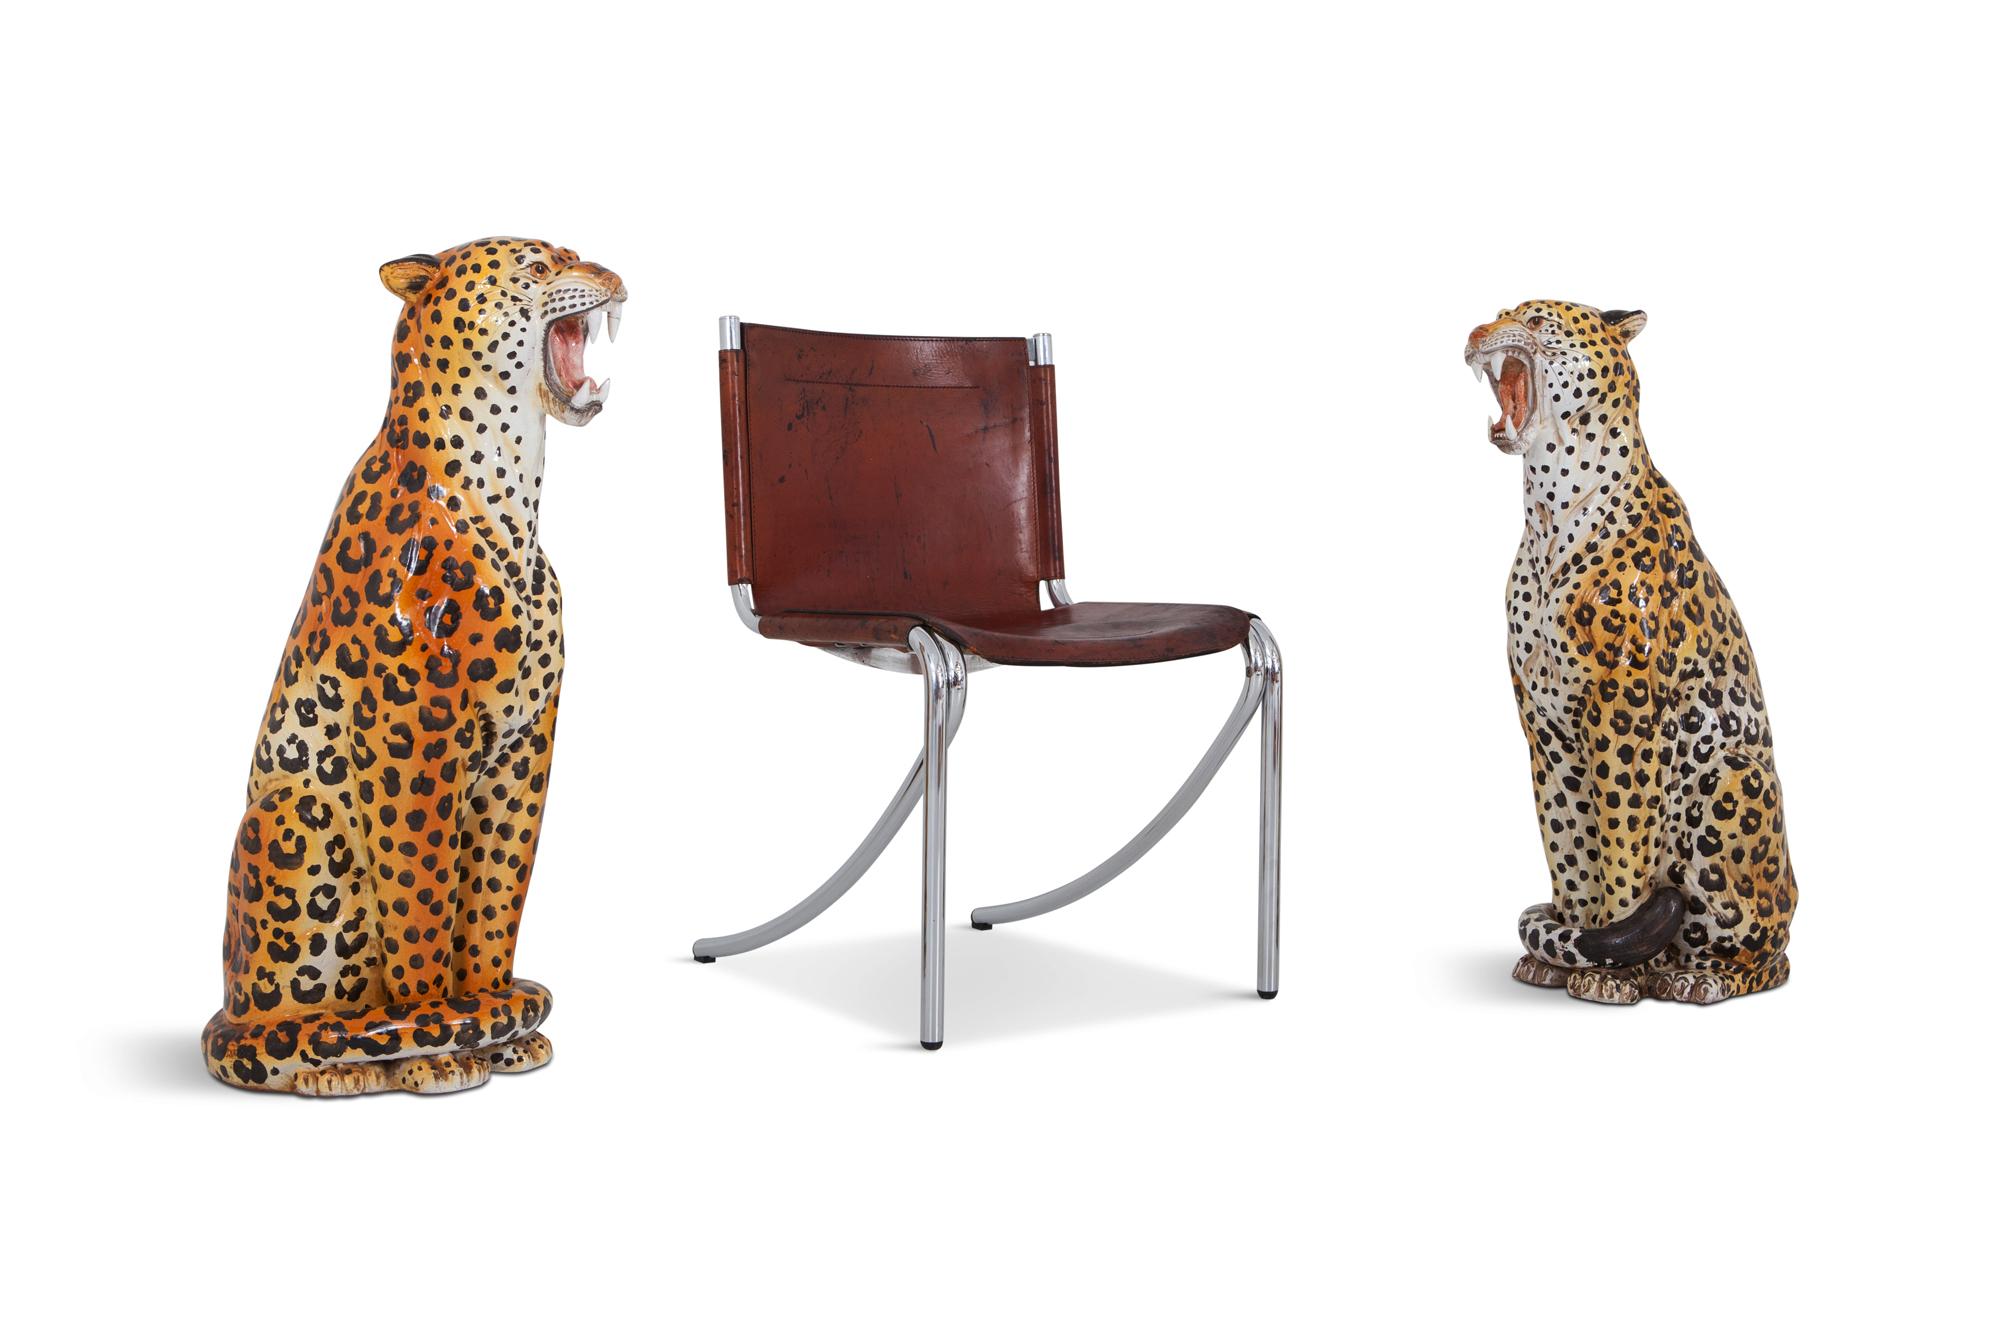 Leopard Ceramic Hand-Painted Sculptures from Italy, 1950s 1